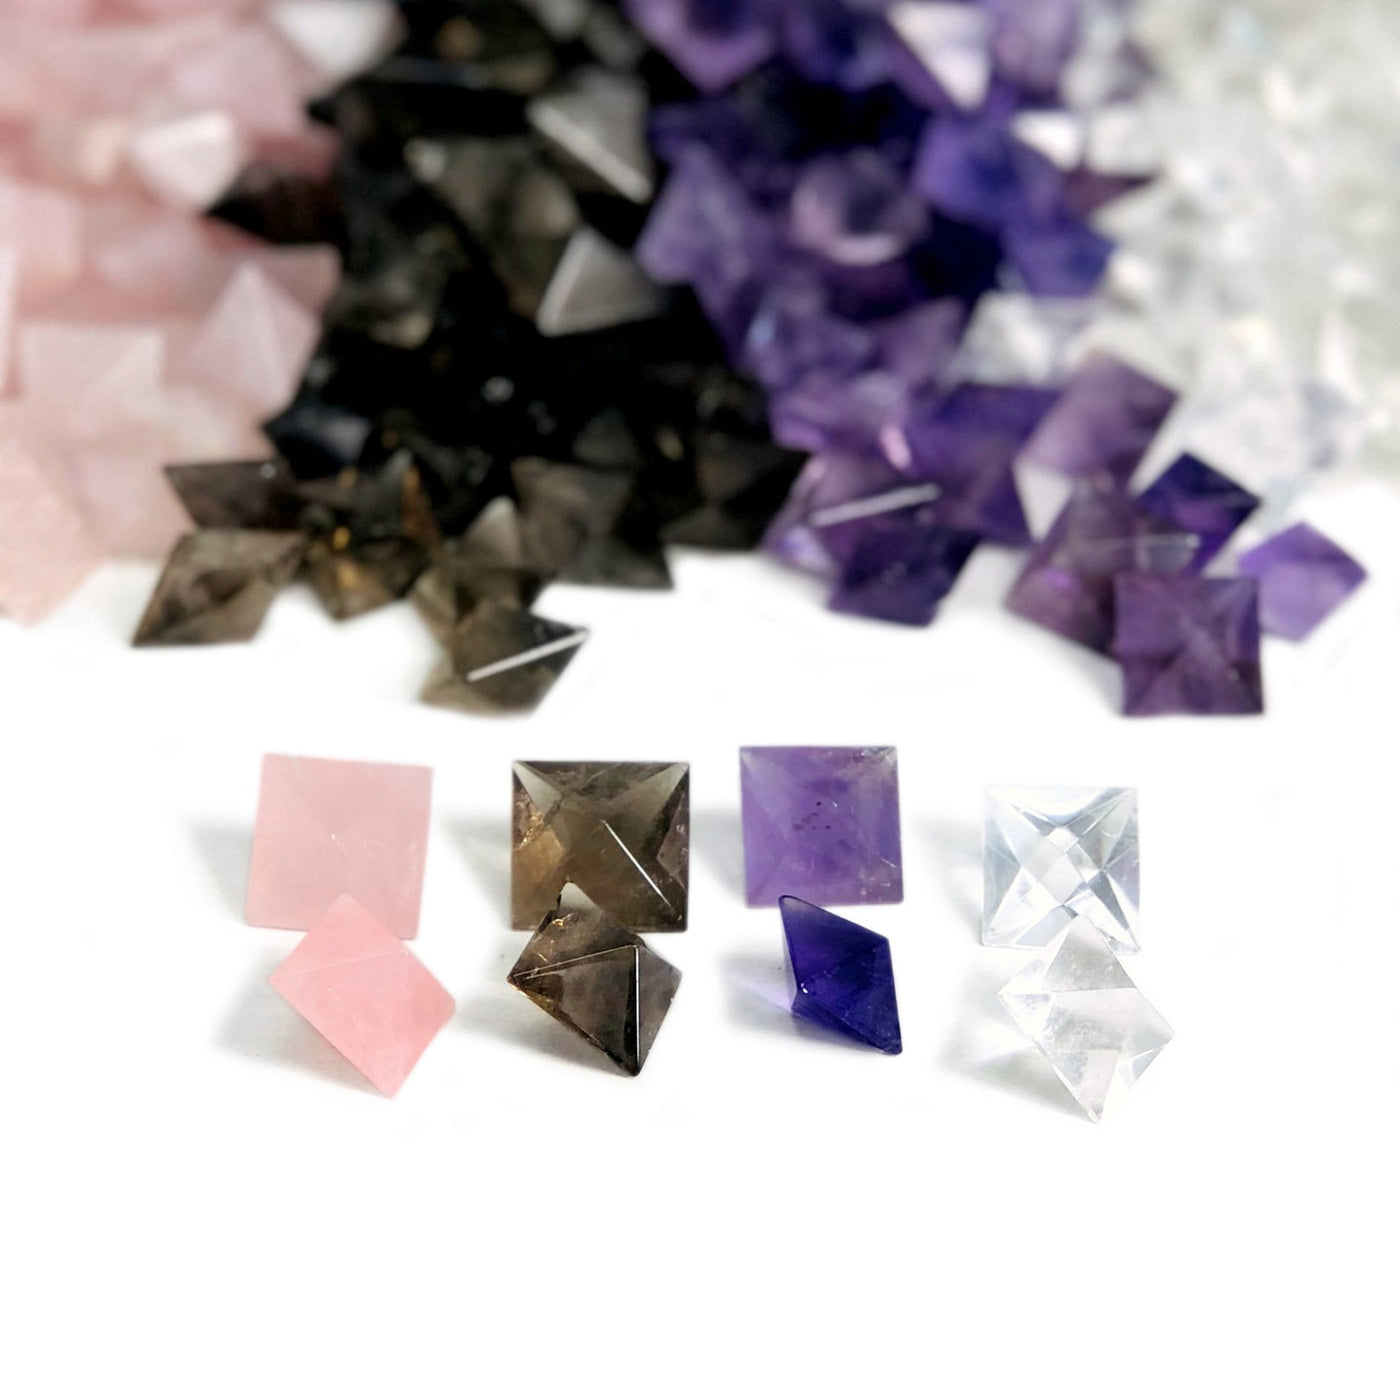 Gemstone Octahedron shown here in rose quartz, smoky quartz, amethysyt, clear quartz, in front with lots of others in background